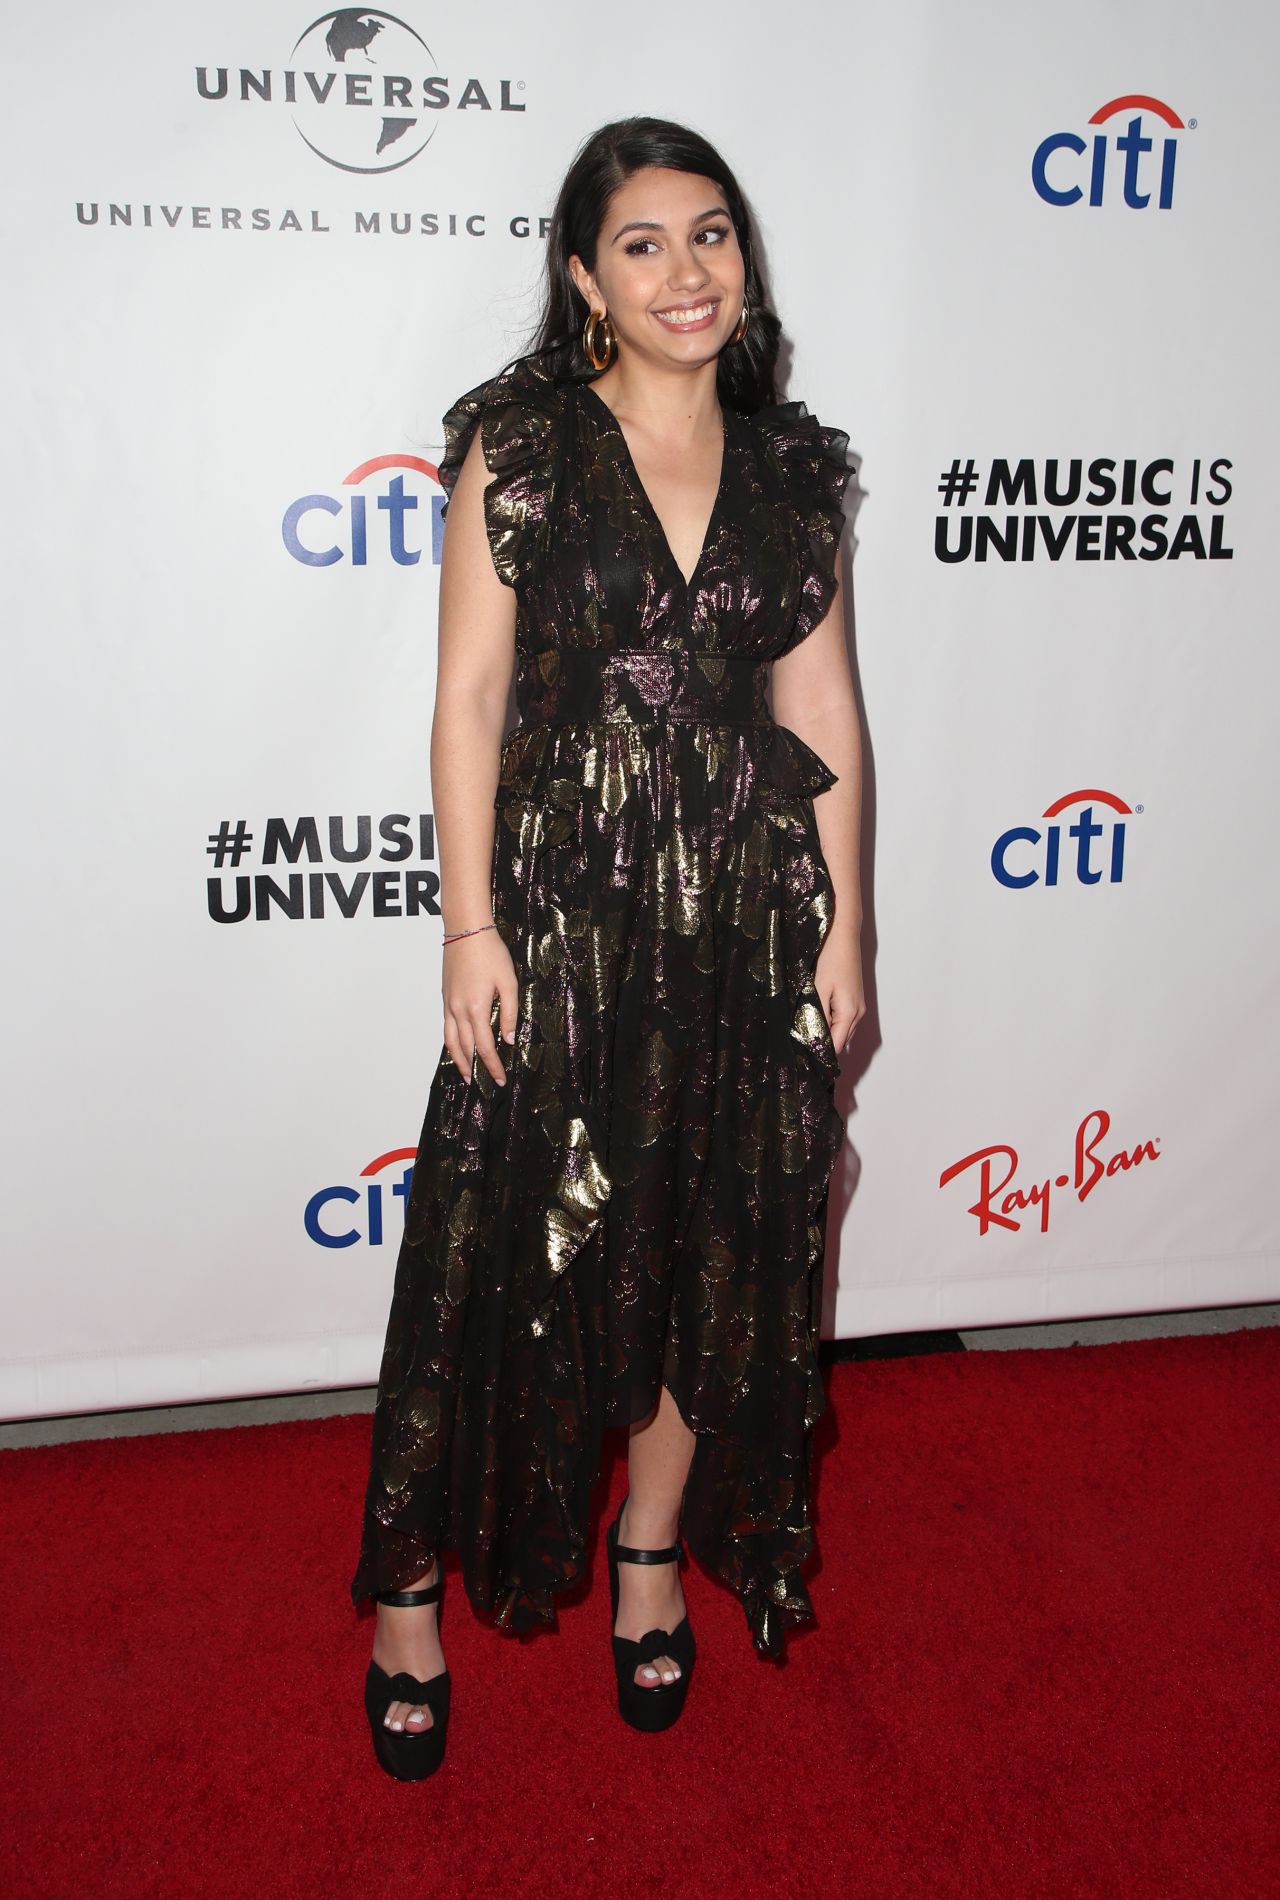 alessia-cara-universal-music-group-grammy-after-party-02-10-2019-8.jpg